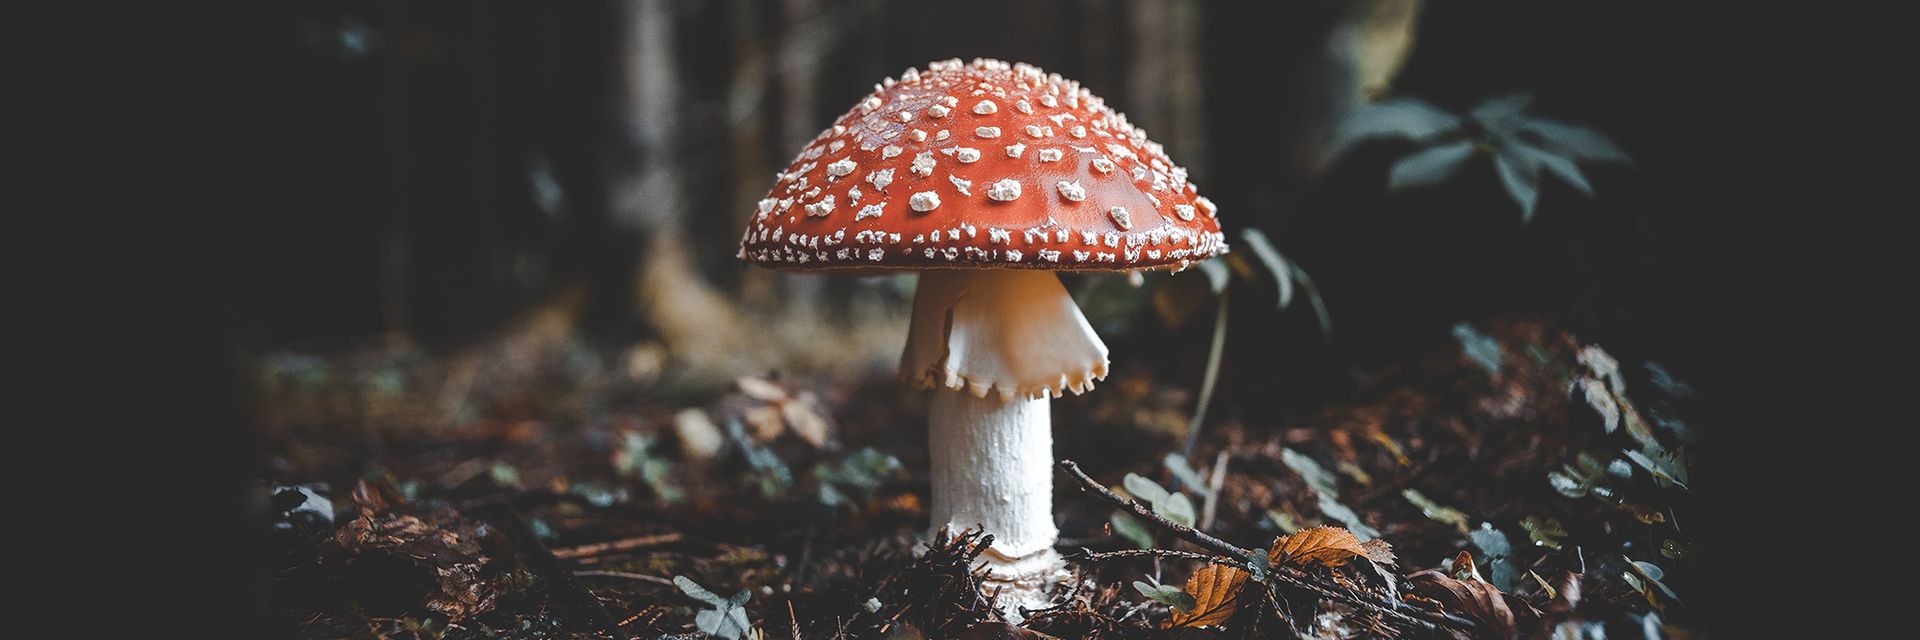 Could Mushrooms Save Humanity&#63; The Wondrous Powers and Potential of Fungi